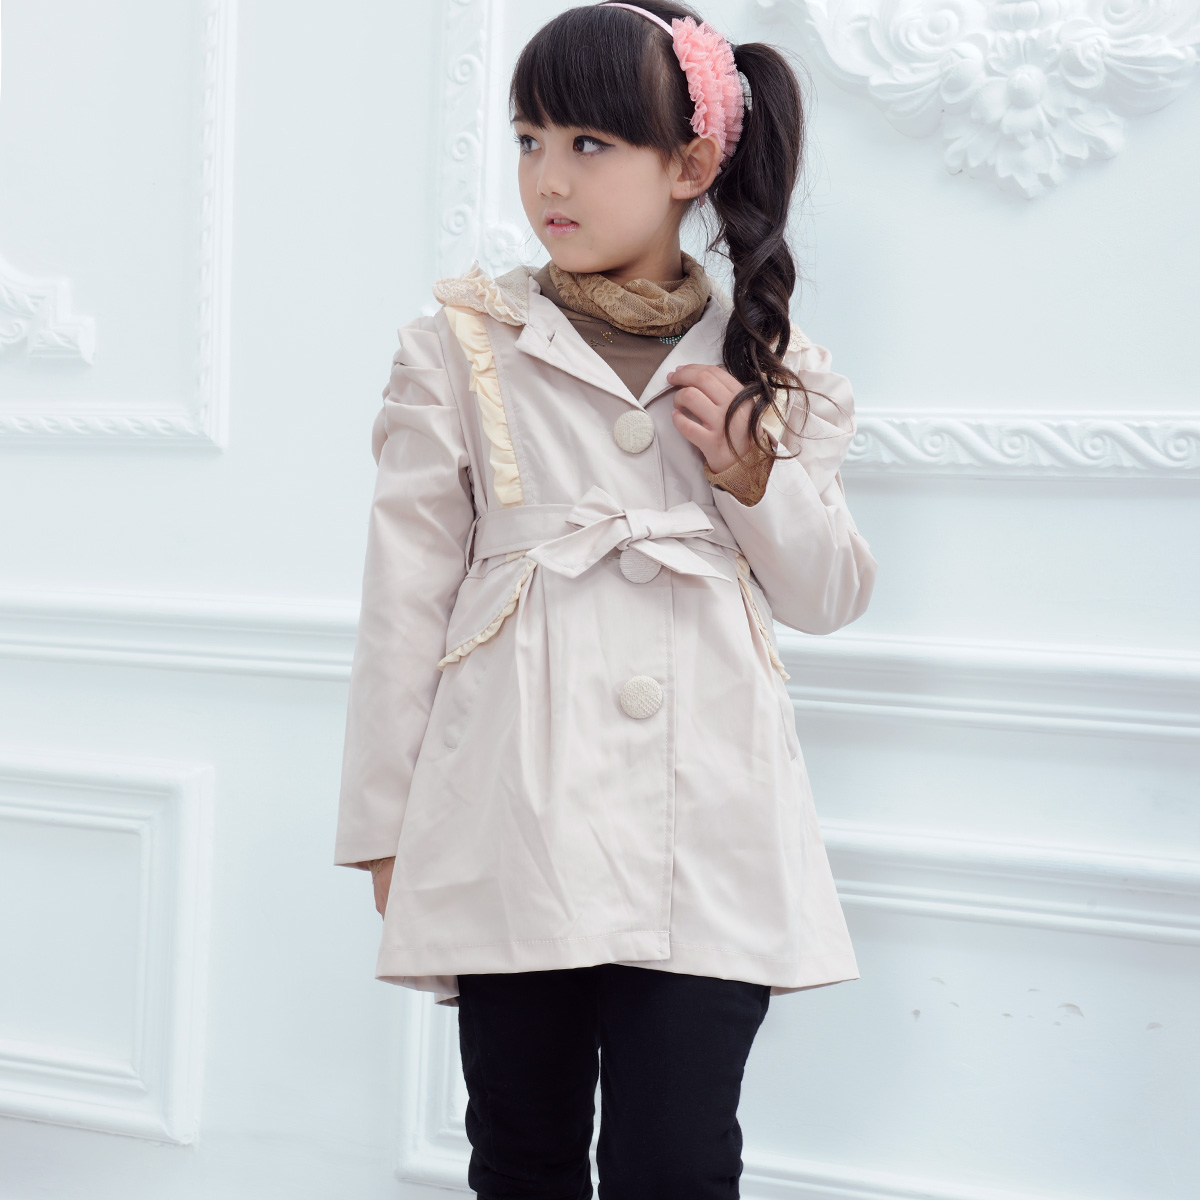 2012 autumn slim with a hood overcoat female child trench outerwear child outerwear 808